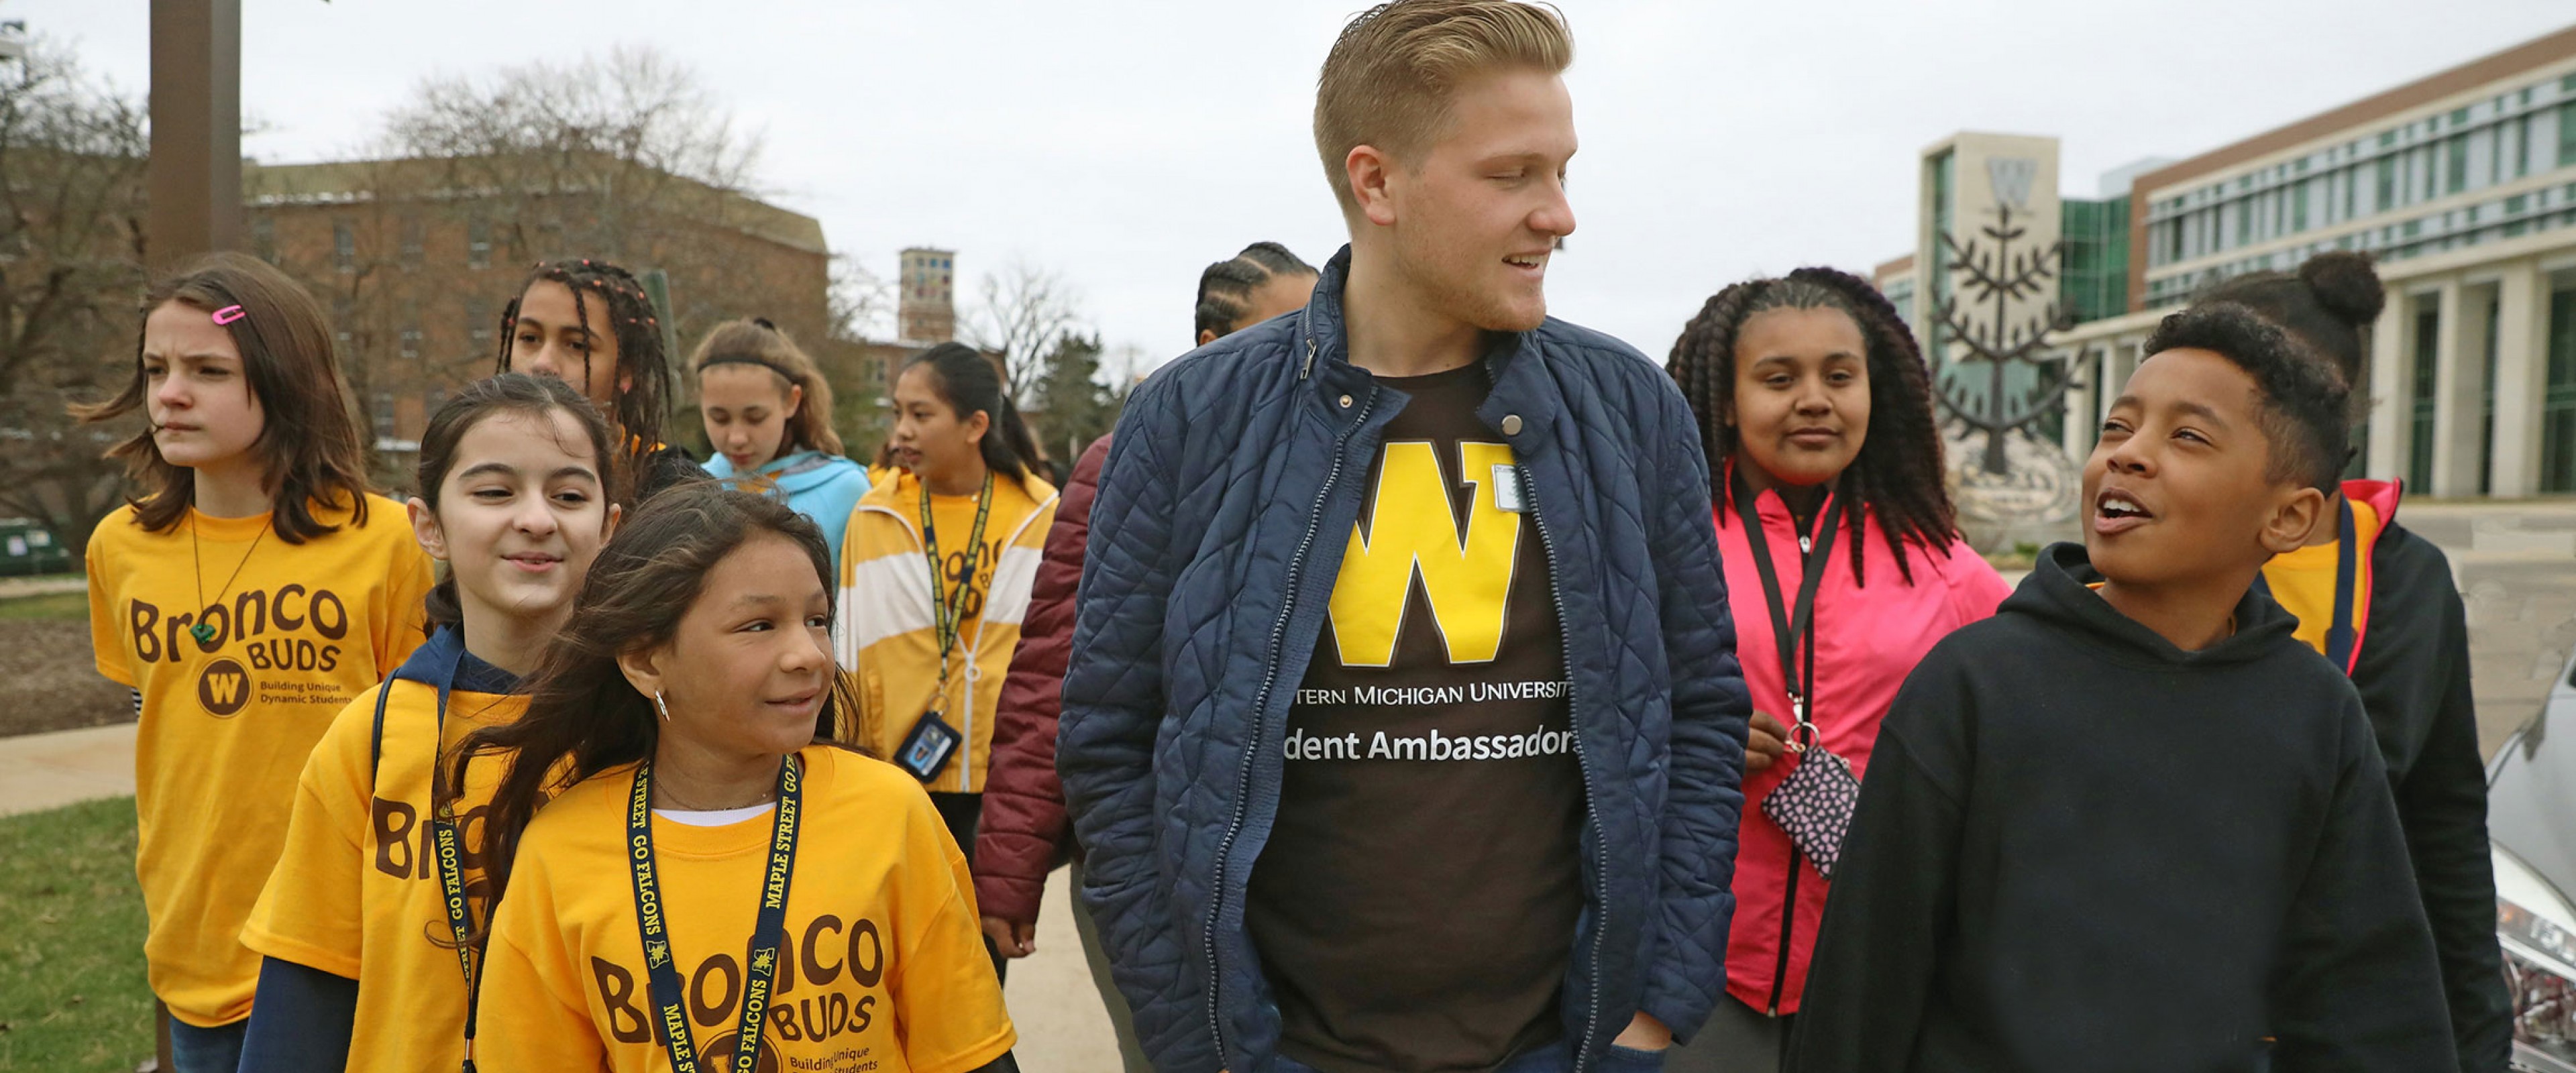 A student ambassador walks main campus with a diverse group of middle school students